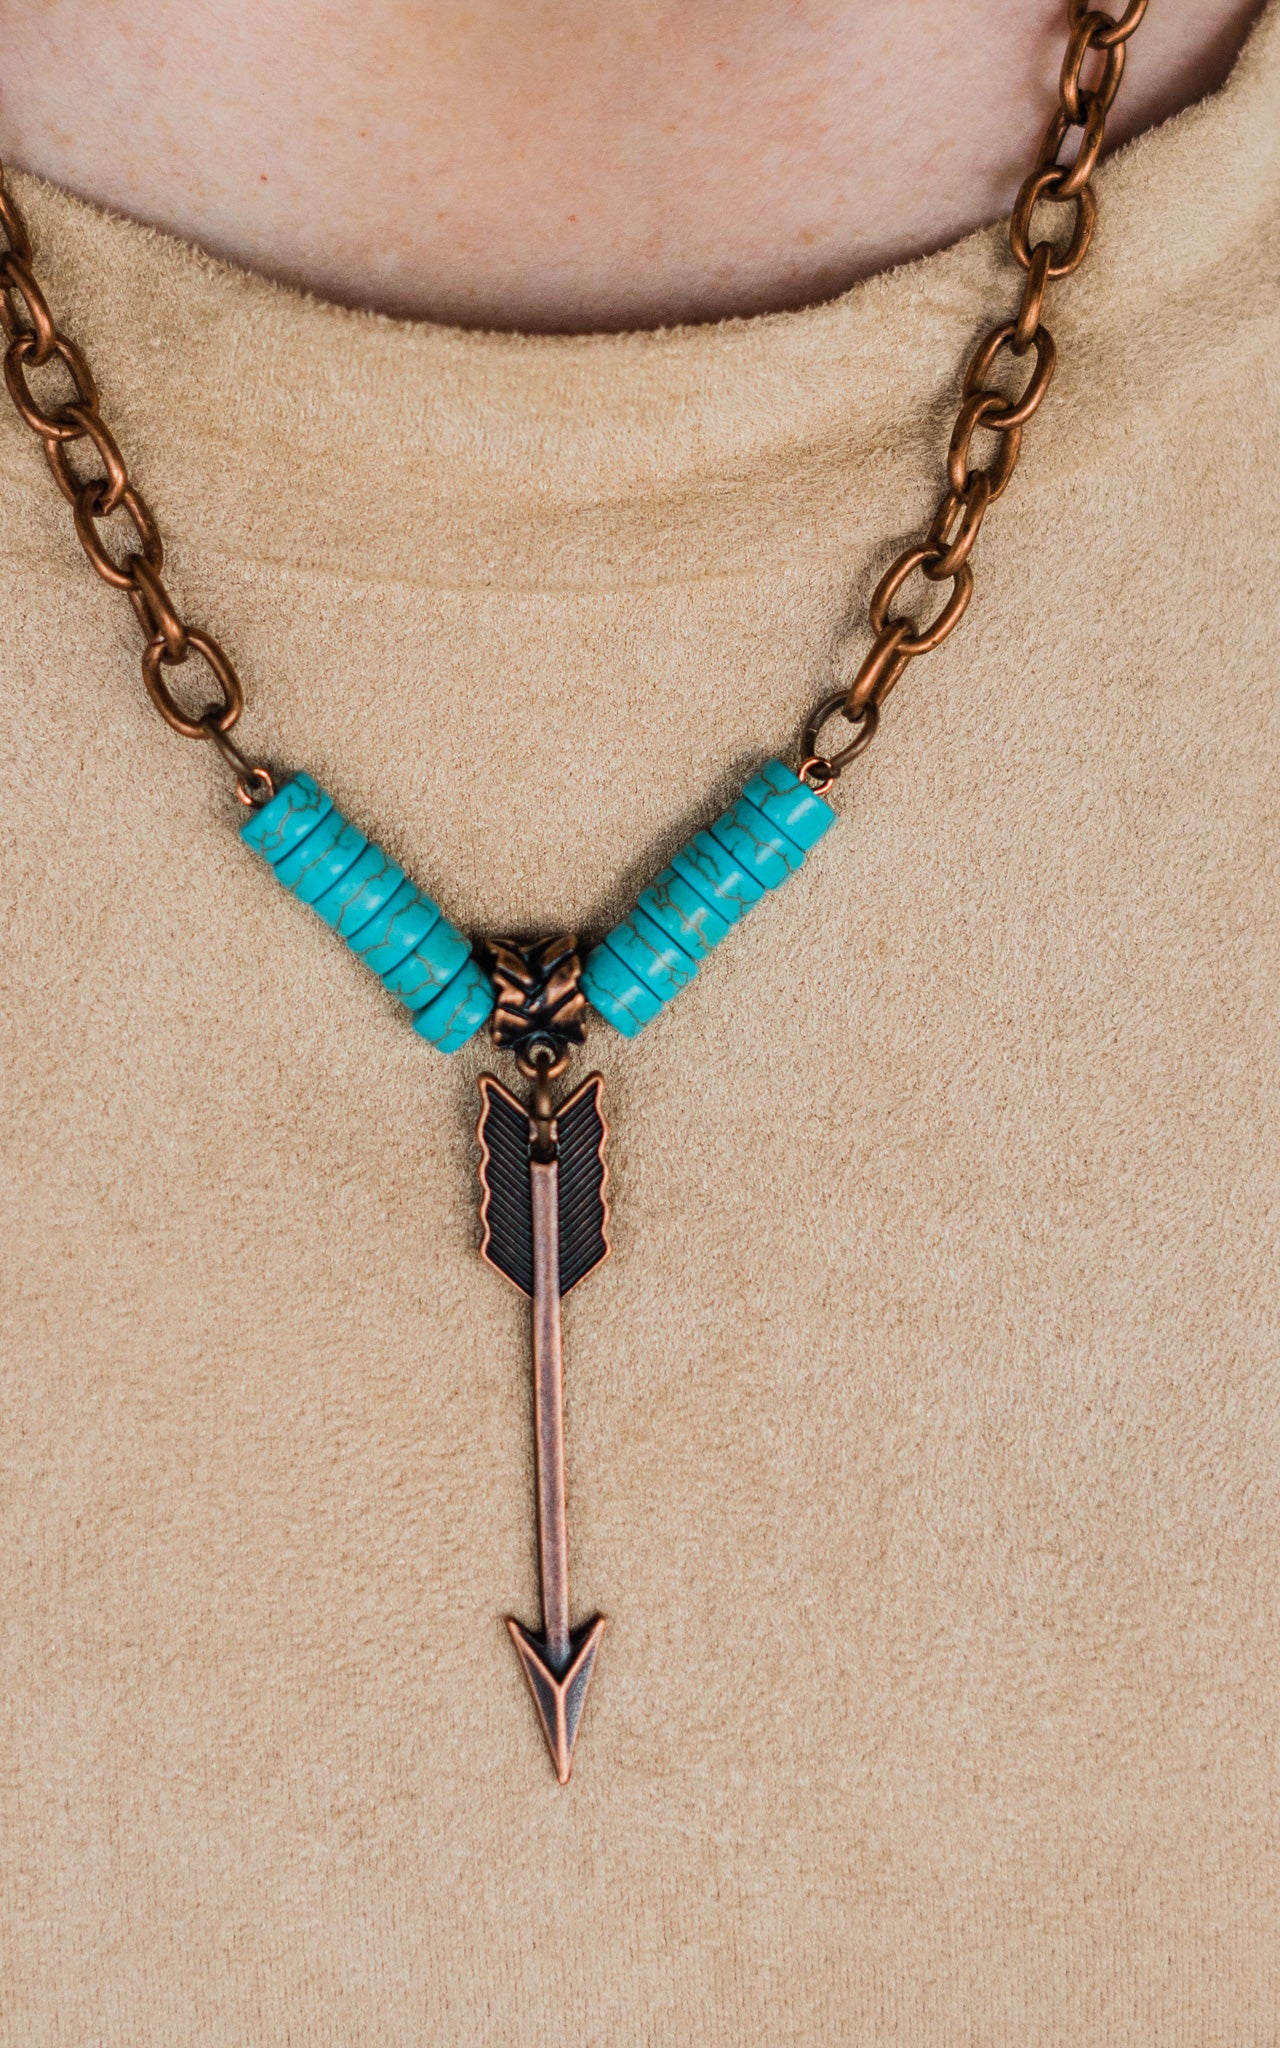 Faux Turquoise Necklace with Arrow Charm